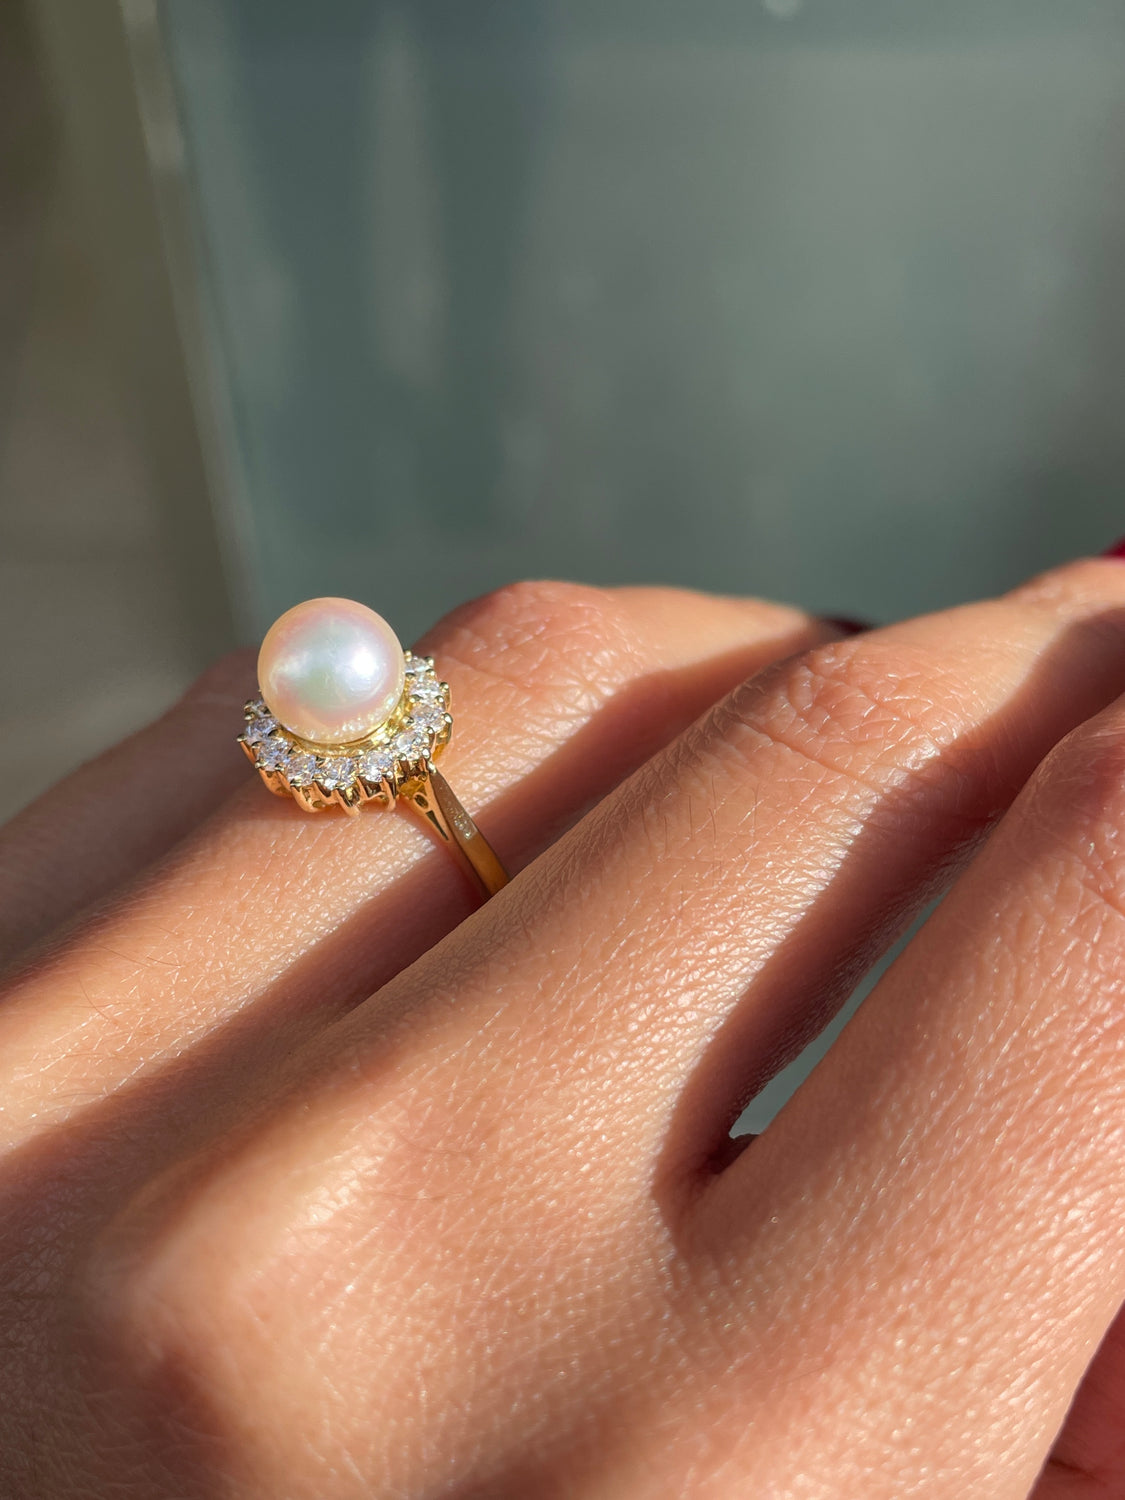 South Sea Pearl and Diamond 18 Carat White Gold Ballerina Cluster Ring